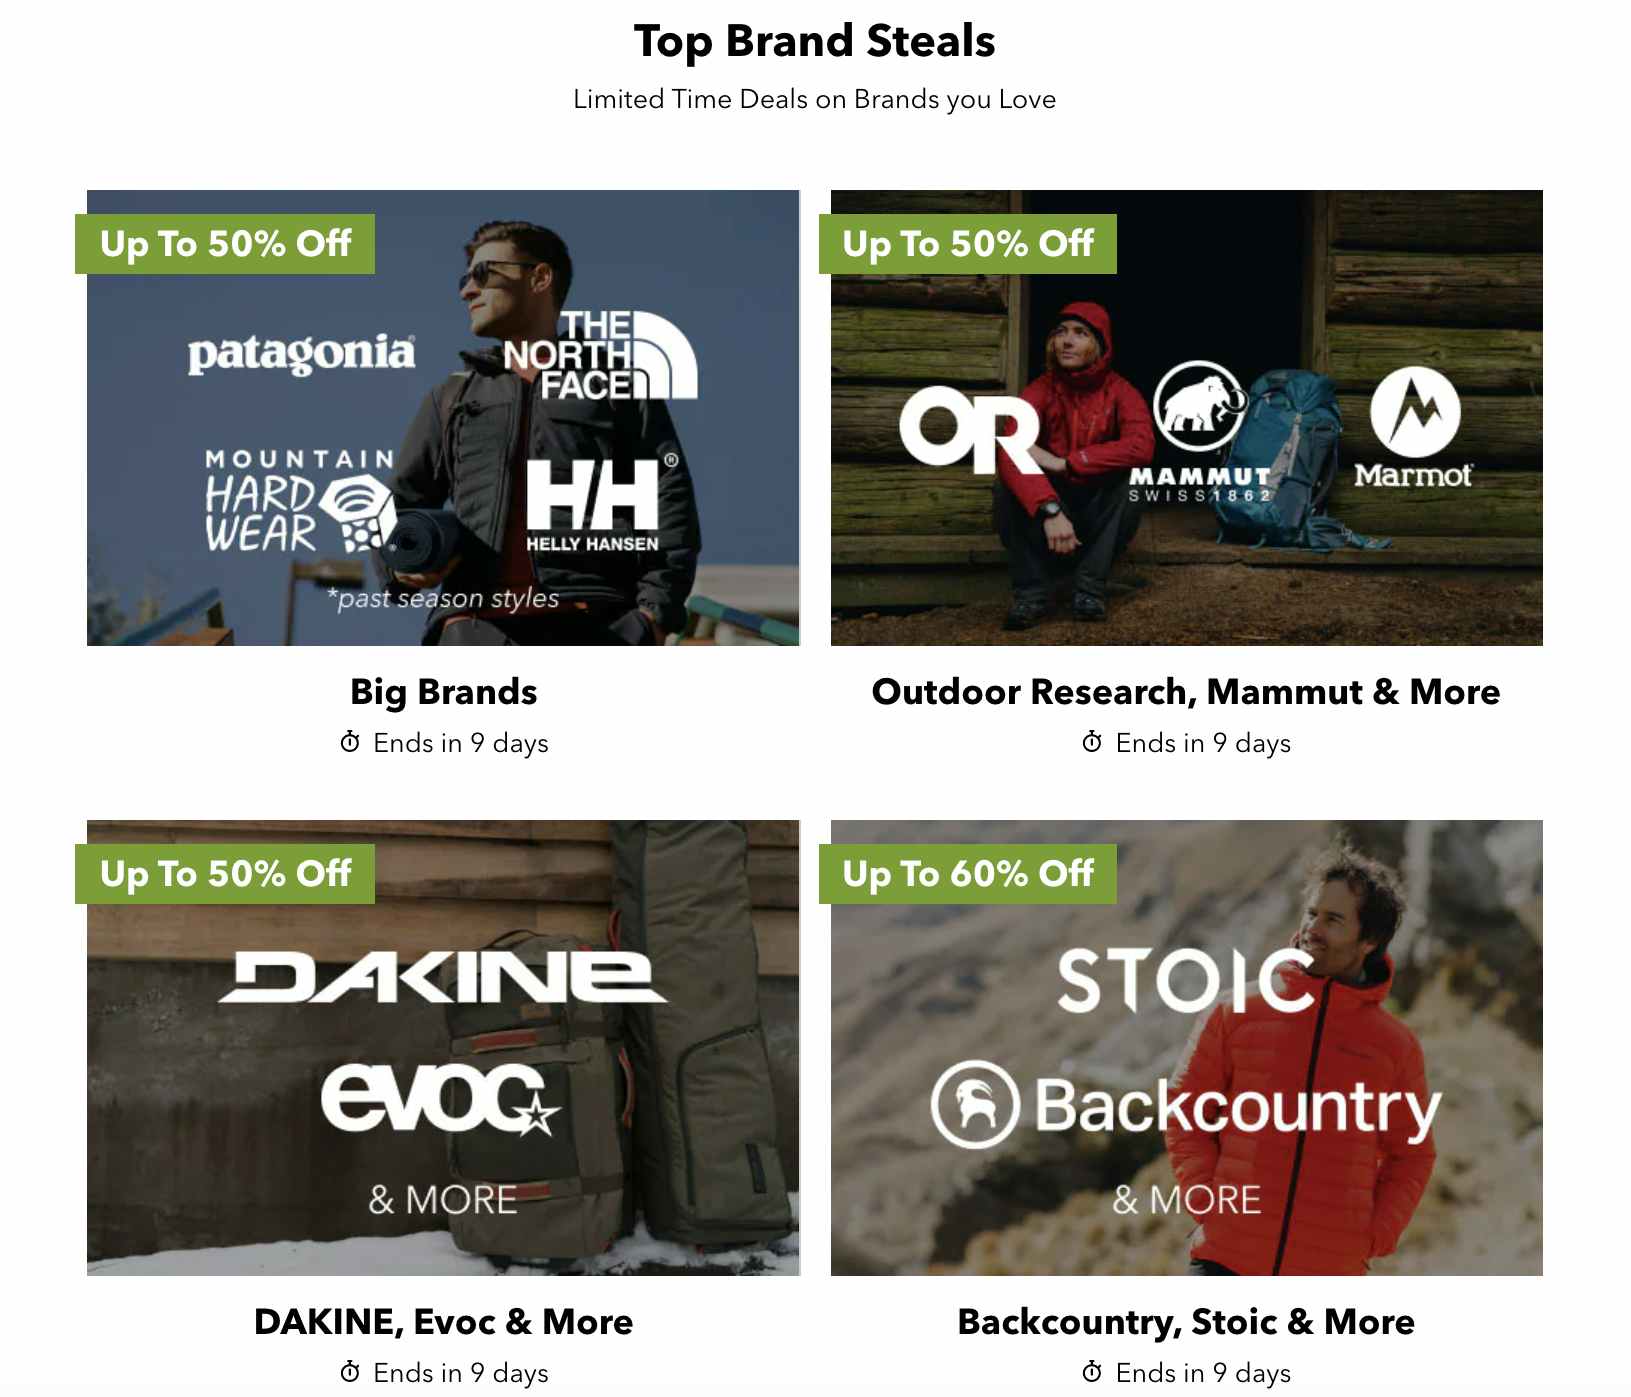 the top brand steals section on steepandcheap.com showing up to 50% off patagonia, the north face, and more